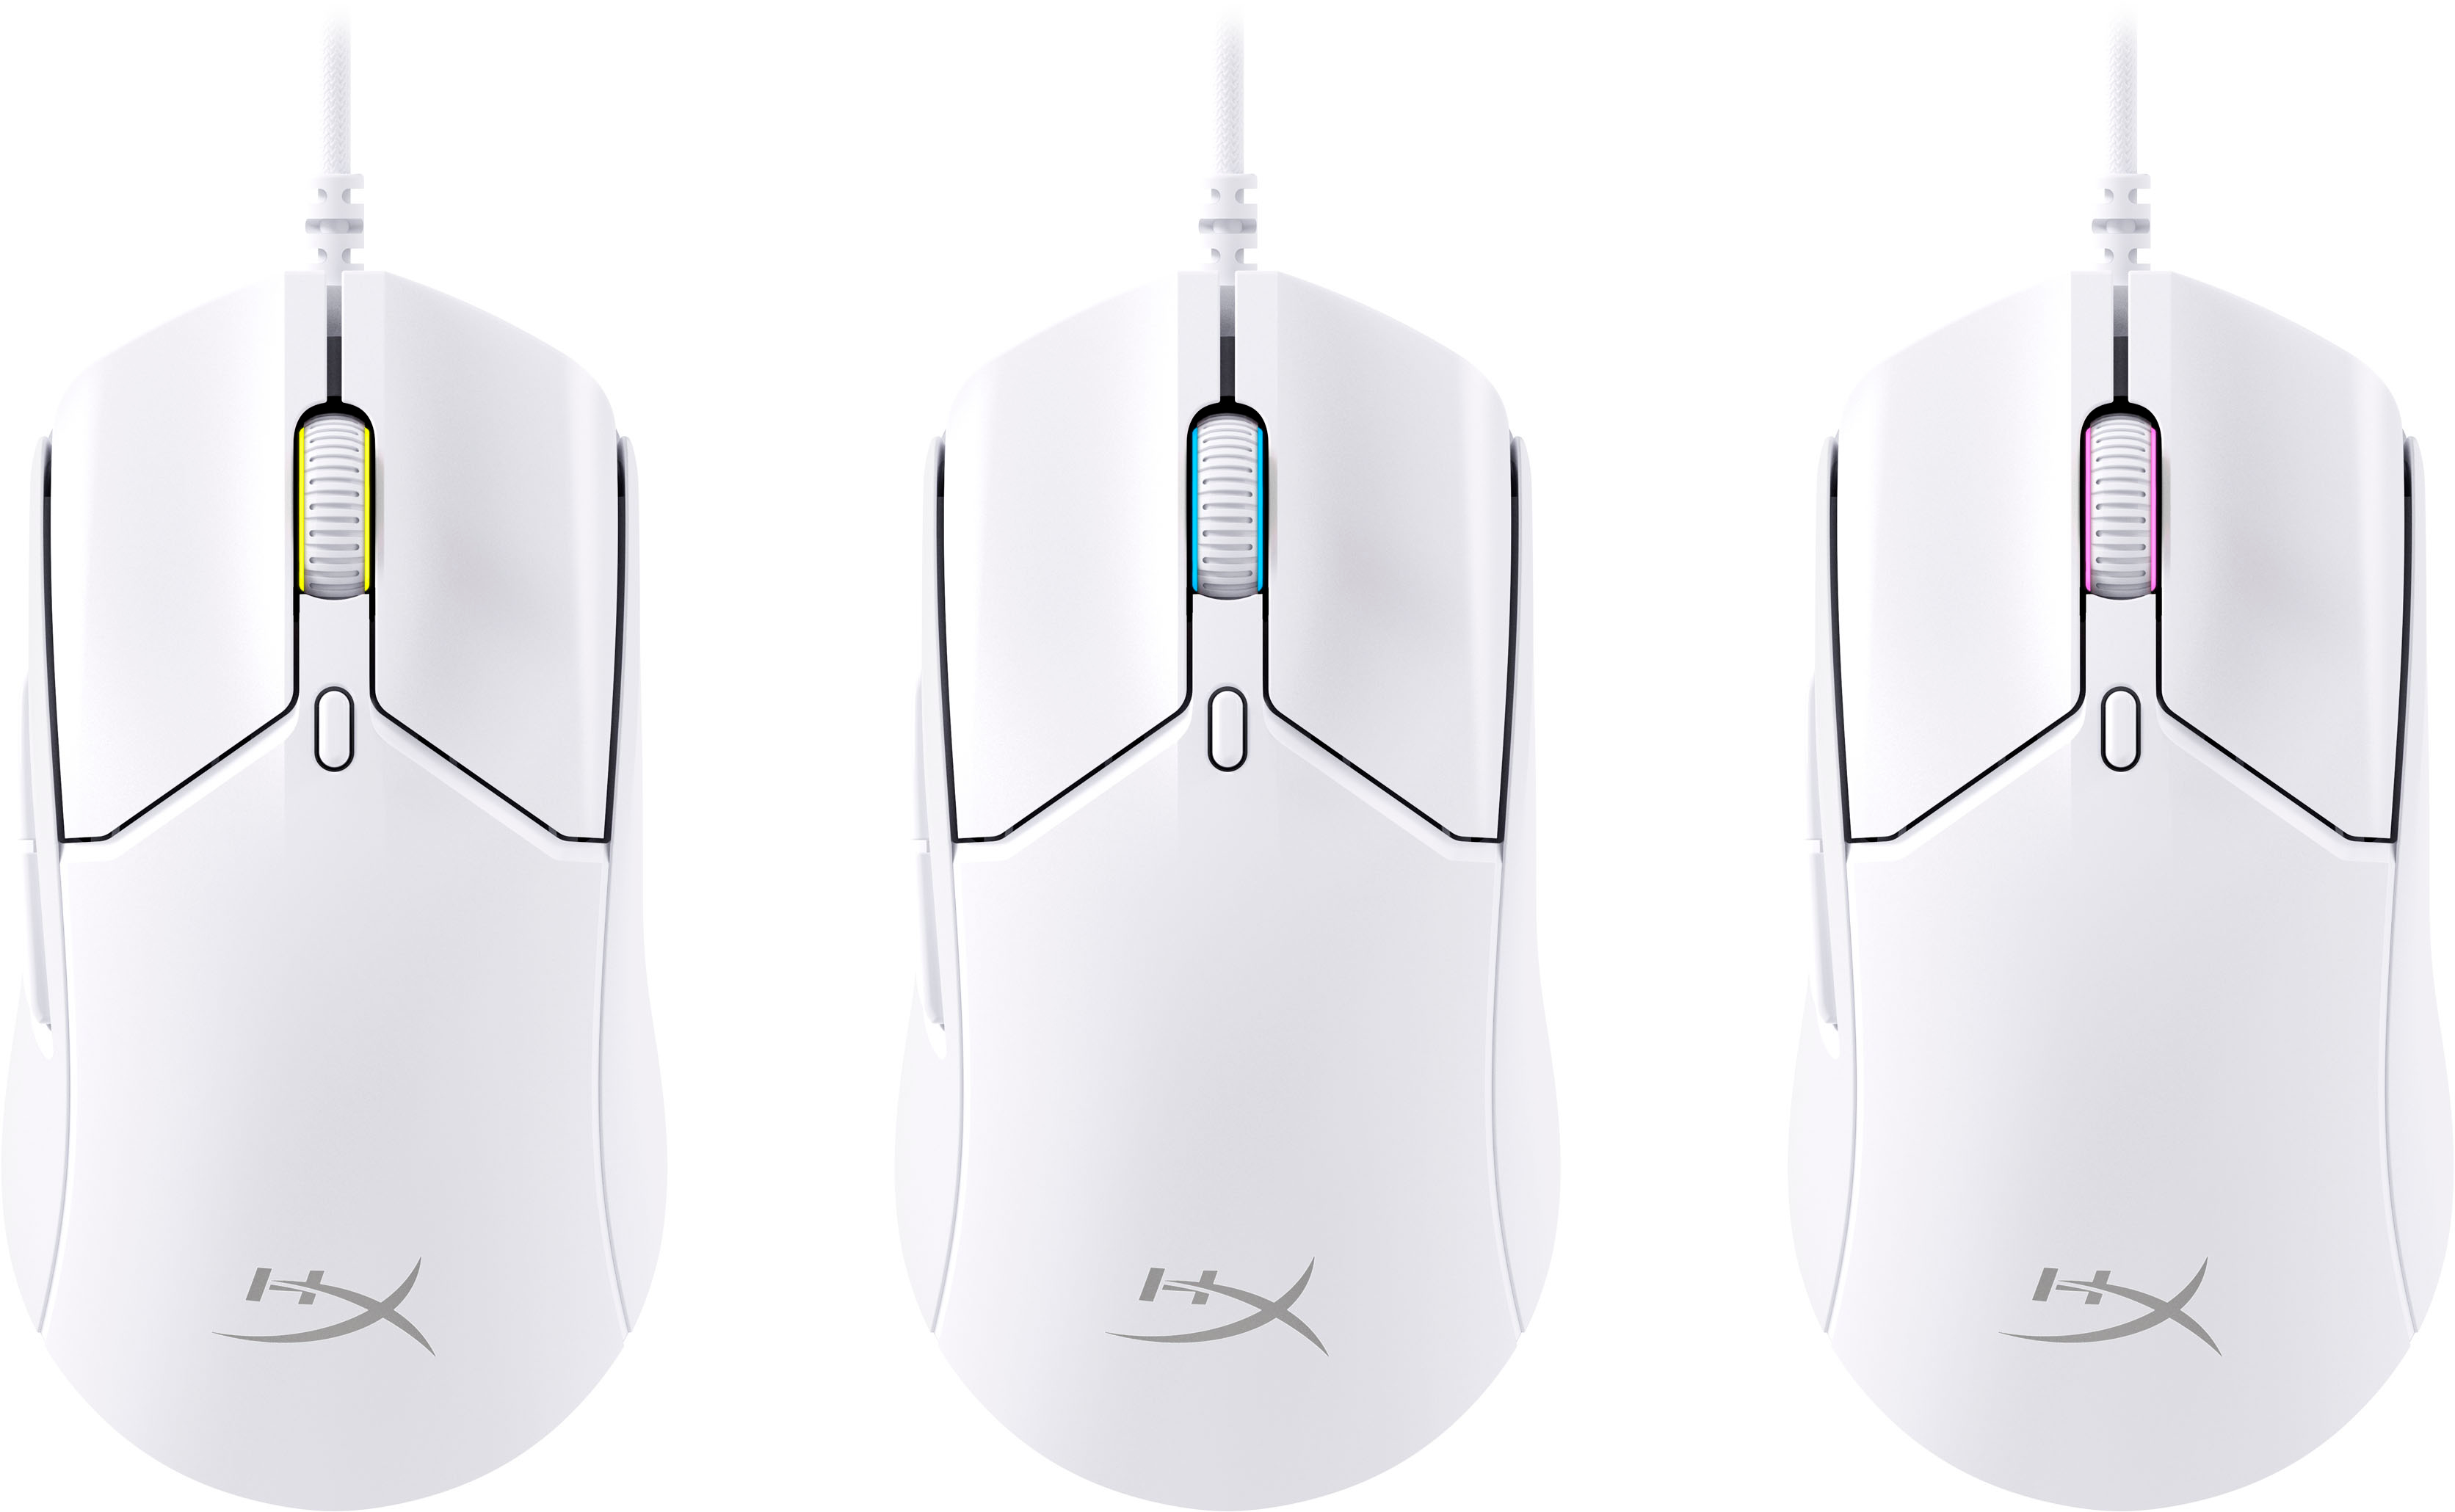 HyperX Pulsefire Buy Optical with Gaming Mouse Wired 6N0A8AA RGB Lighting Lightweight - Haste Best White 2